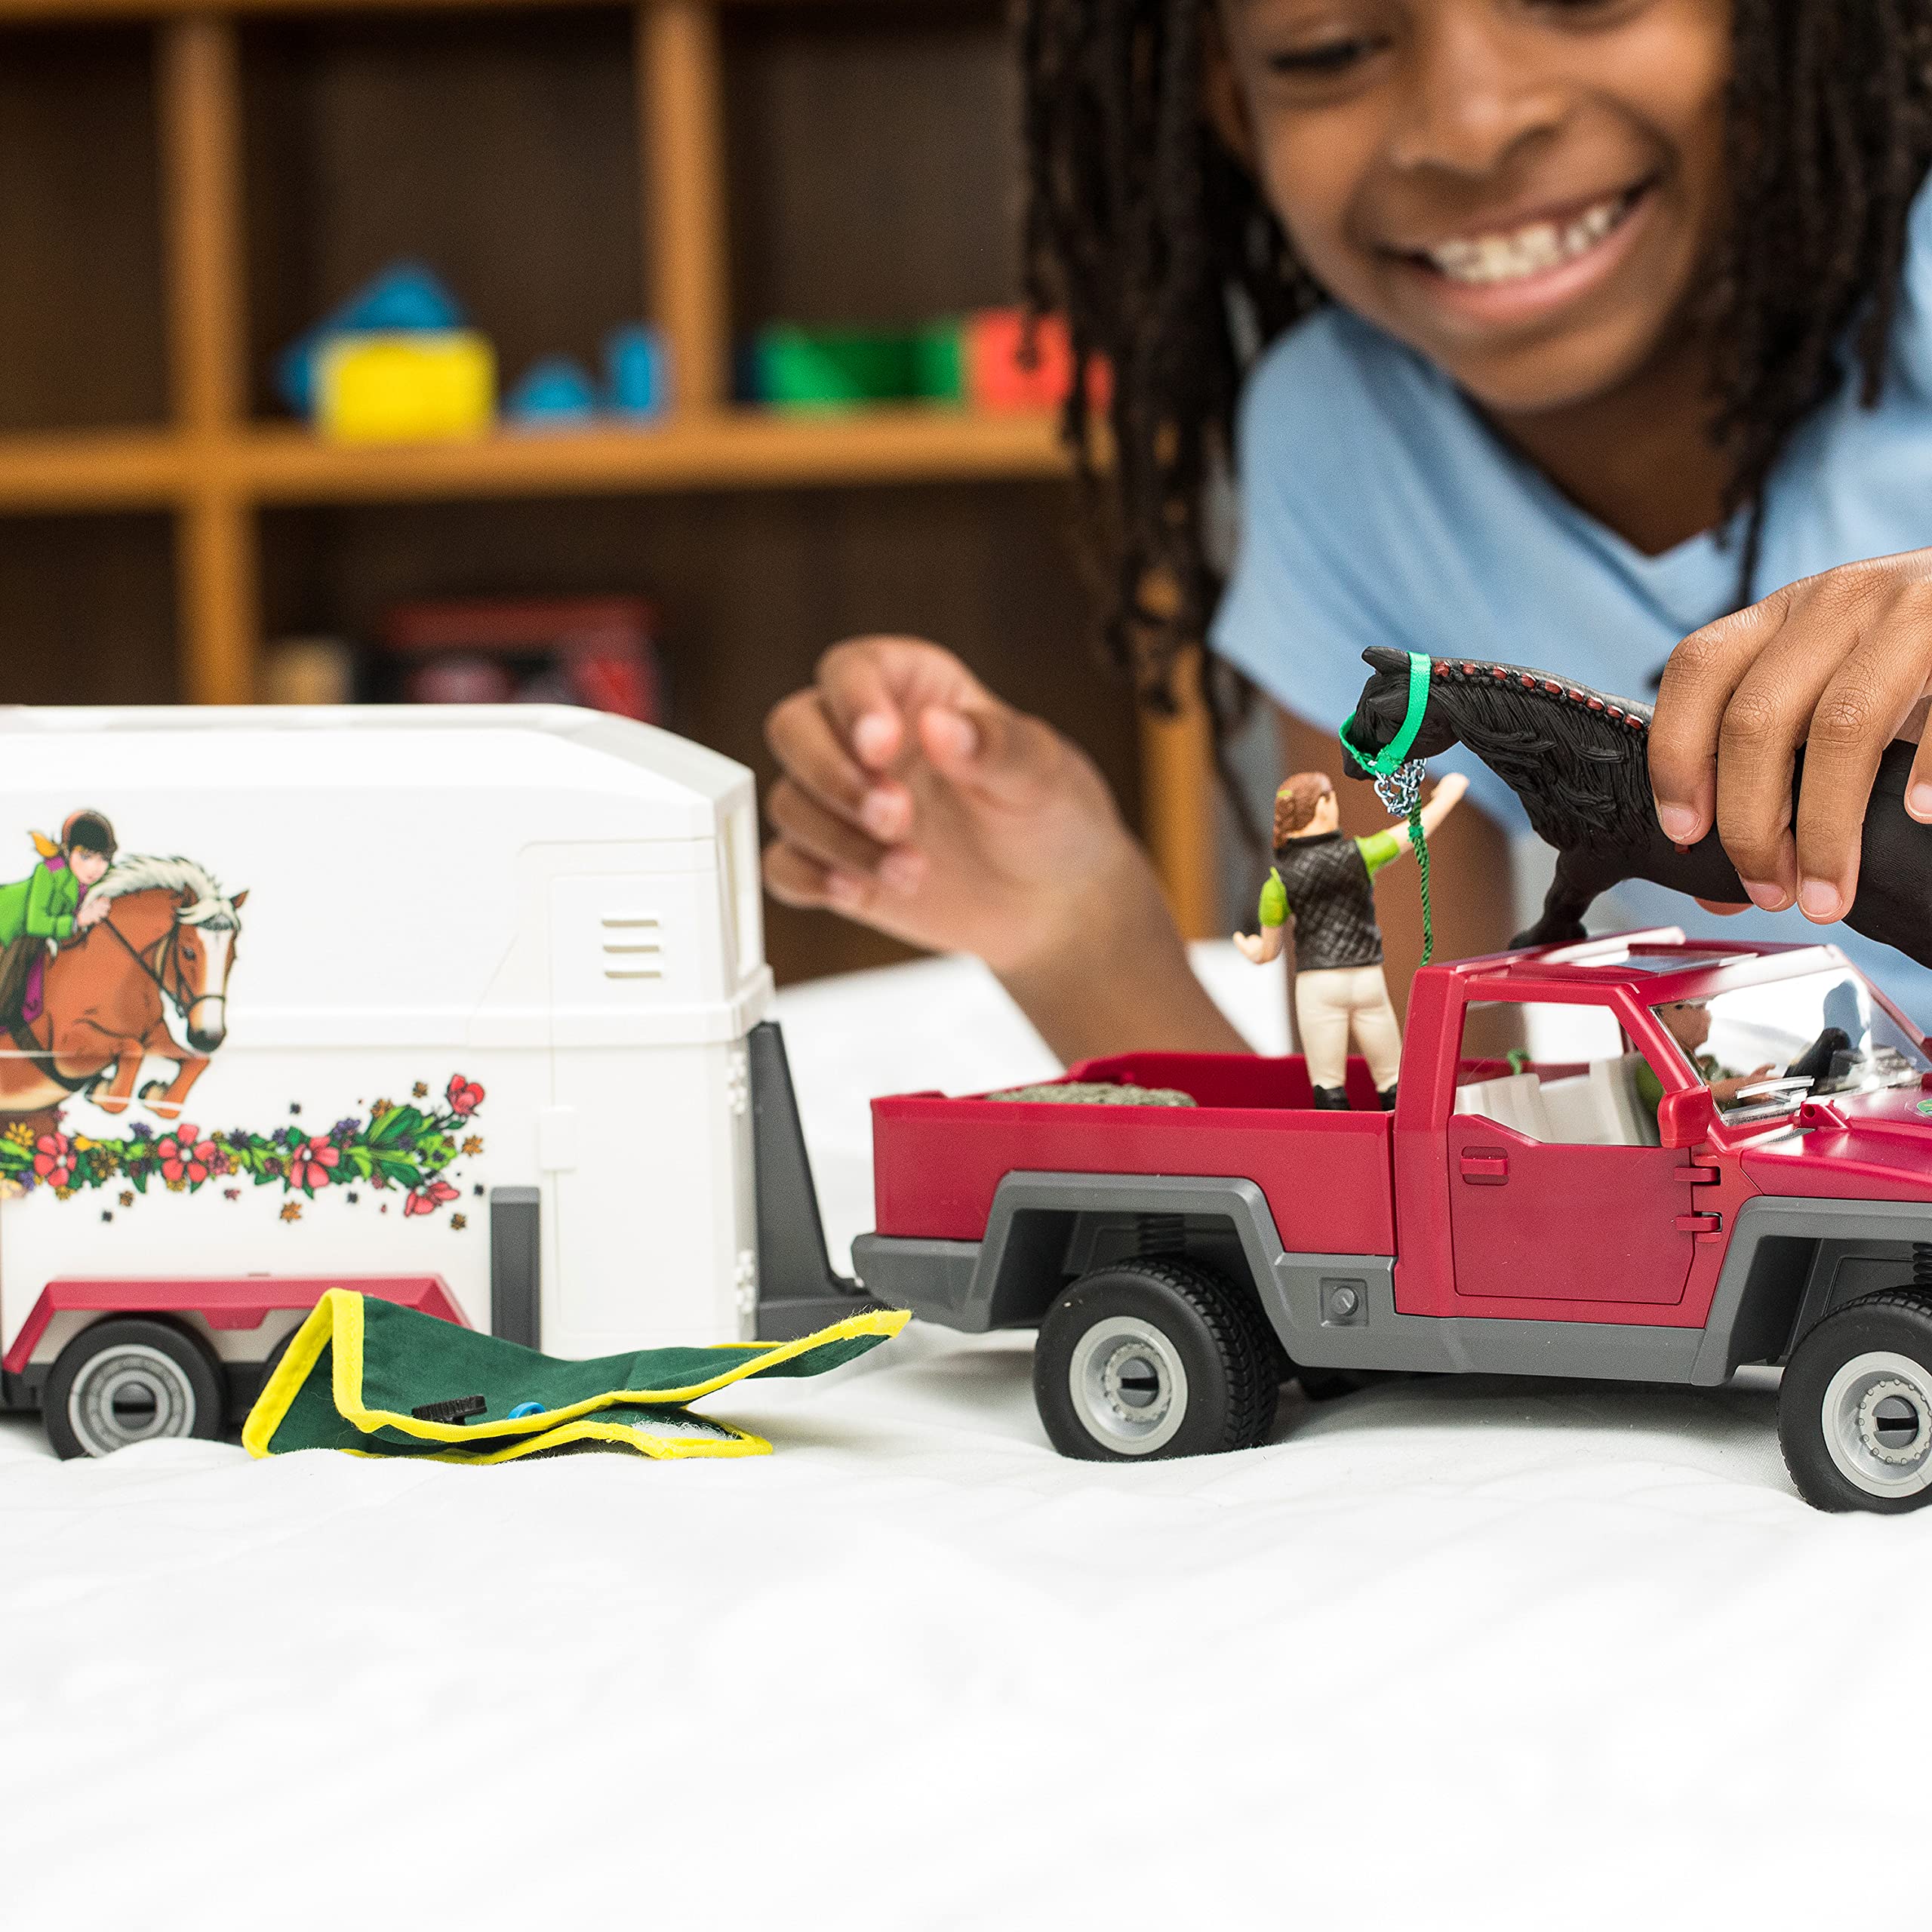 Schleich Horse Truck and Trailer Toys – 14 Piece Pickup Truck & Trailer Playset, with Horse Figurine, Rider Action Figure, and Pony Accessories, for Girls and Boys Ages 5 and Above